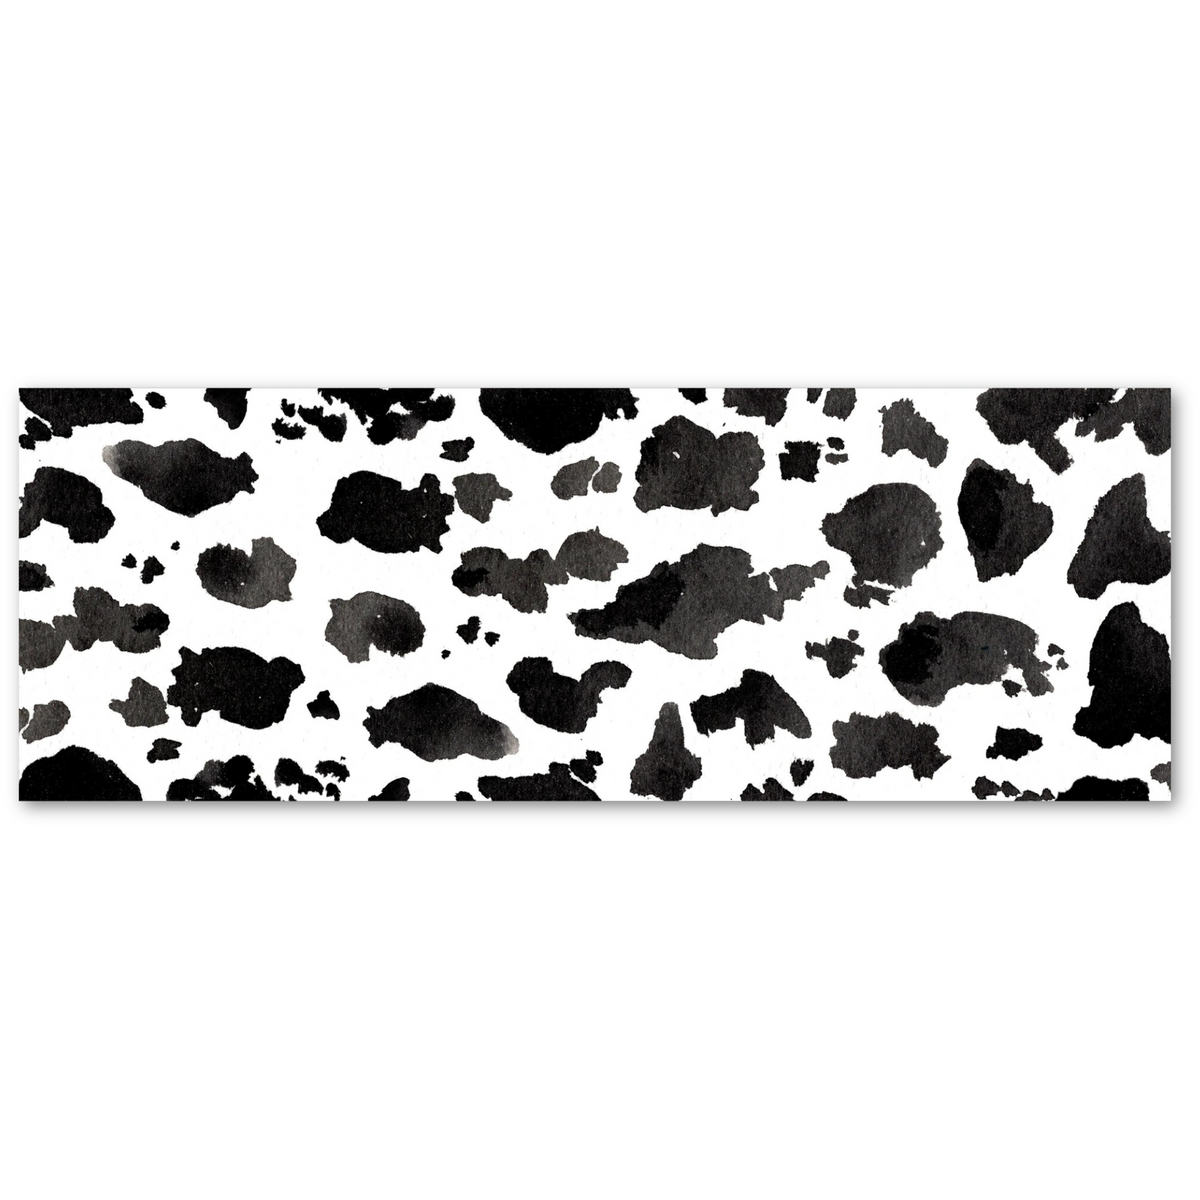 Cow Print Gift Wrapping Paper Roll, Black & White, Moo Barnyard